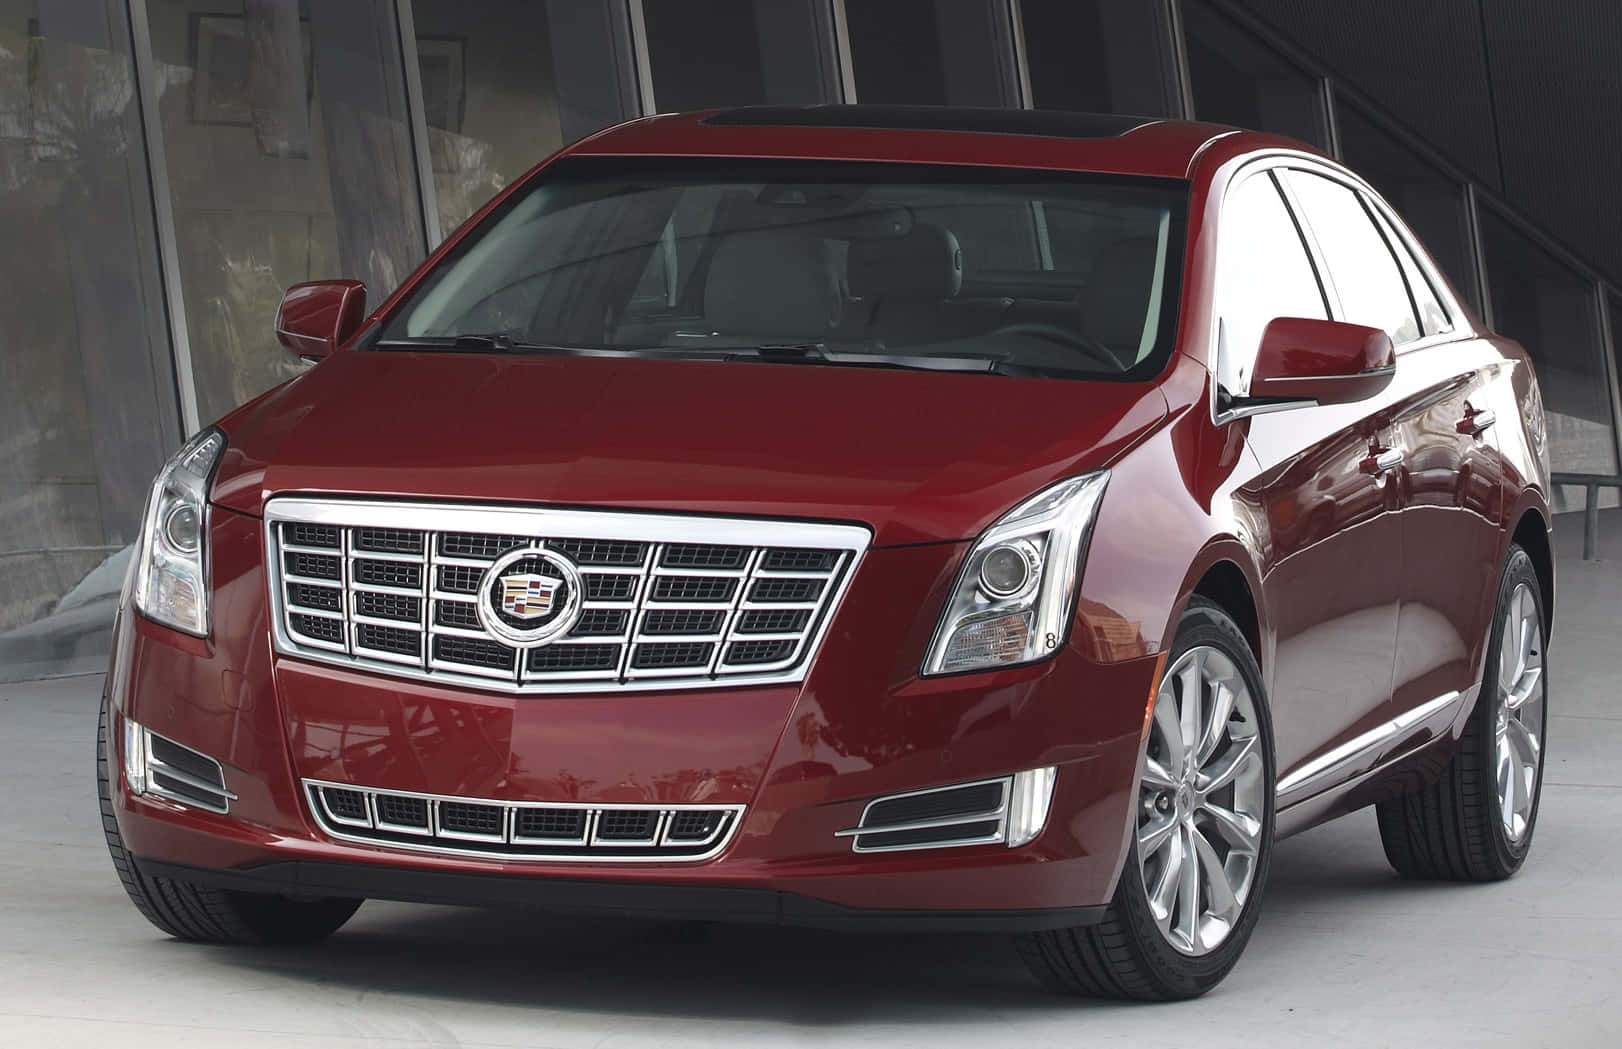 Caption: Sleek and Powerful Cadillac XTS in Motion Wallpaper